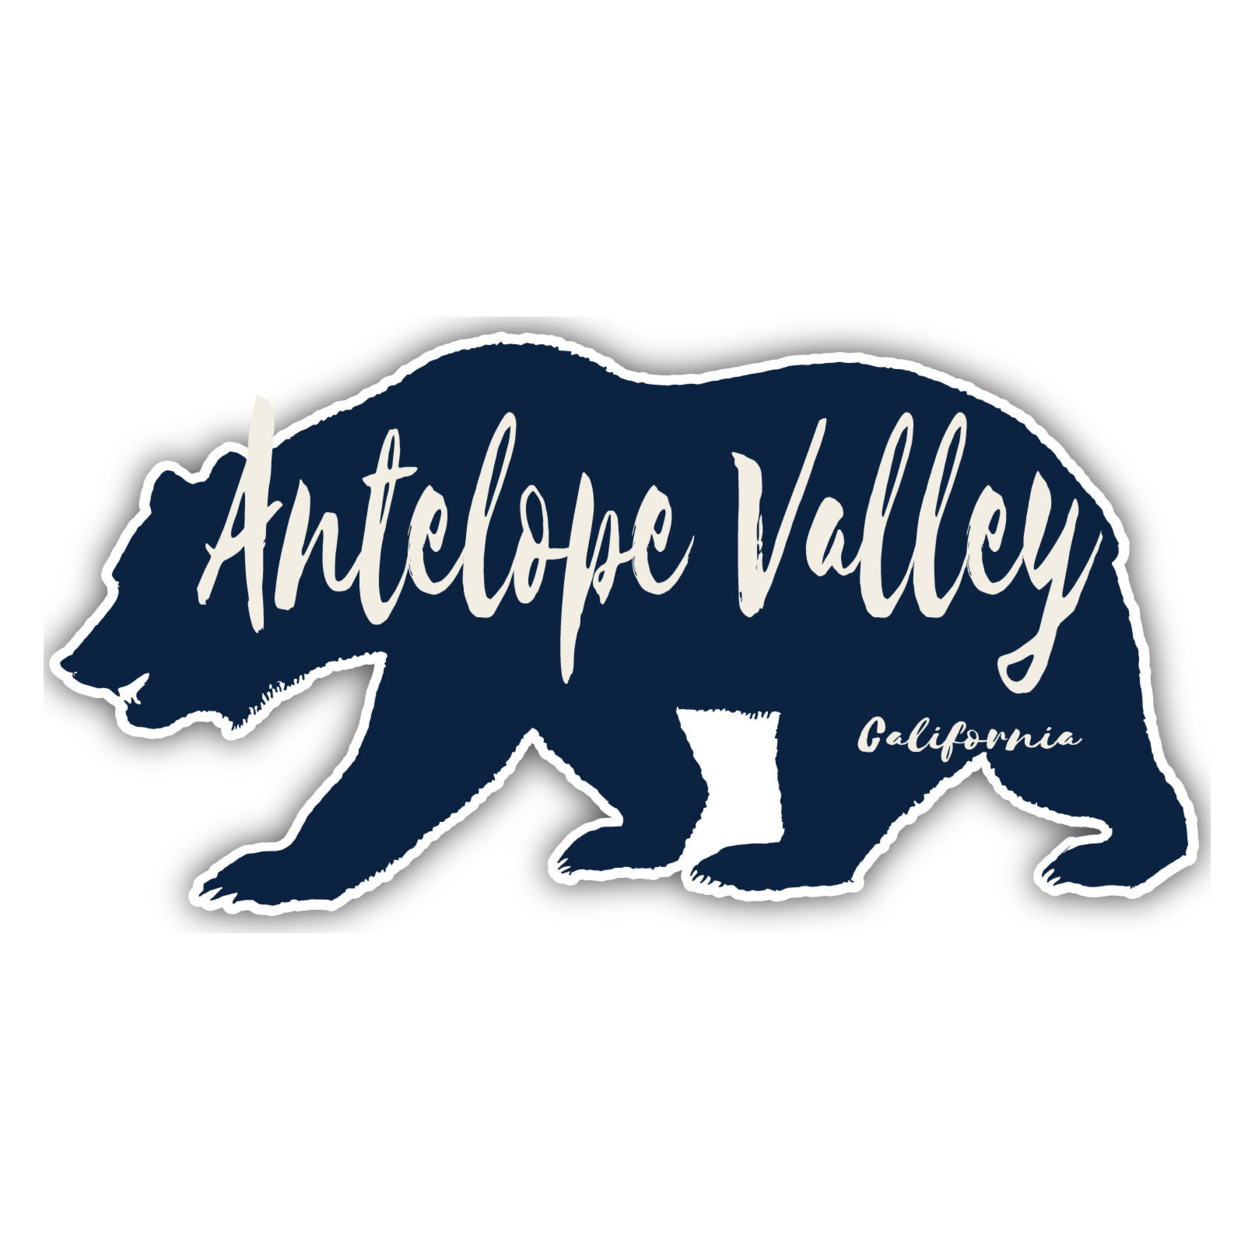 Antelope Valley California Souvenir Decorative Stickers (Choose Theme And Size) - 4-Pack, 4-Inch, Bear